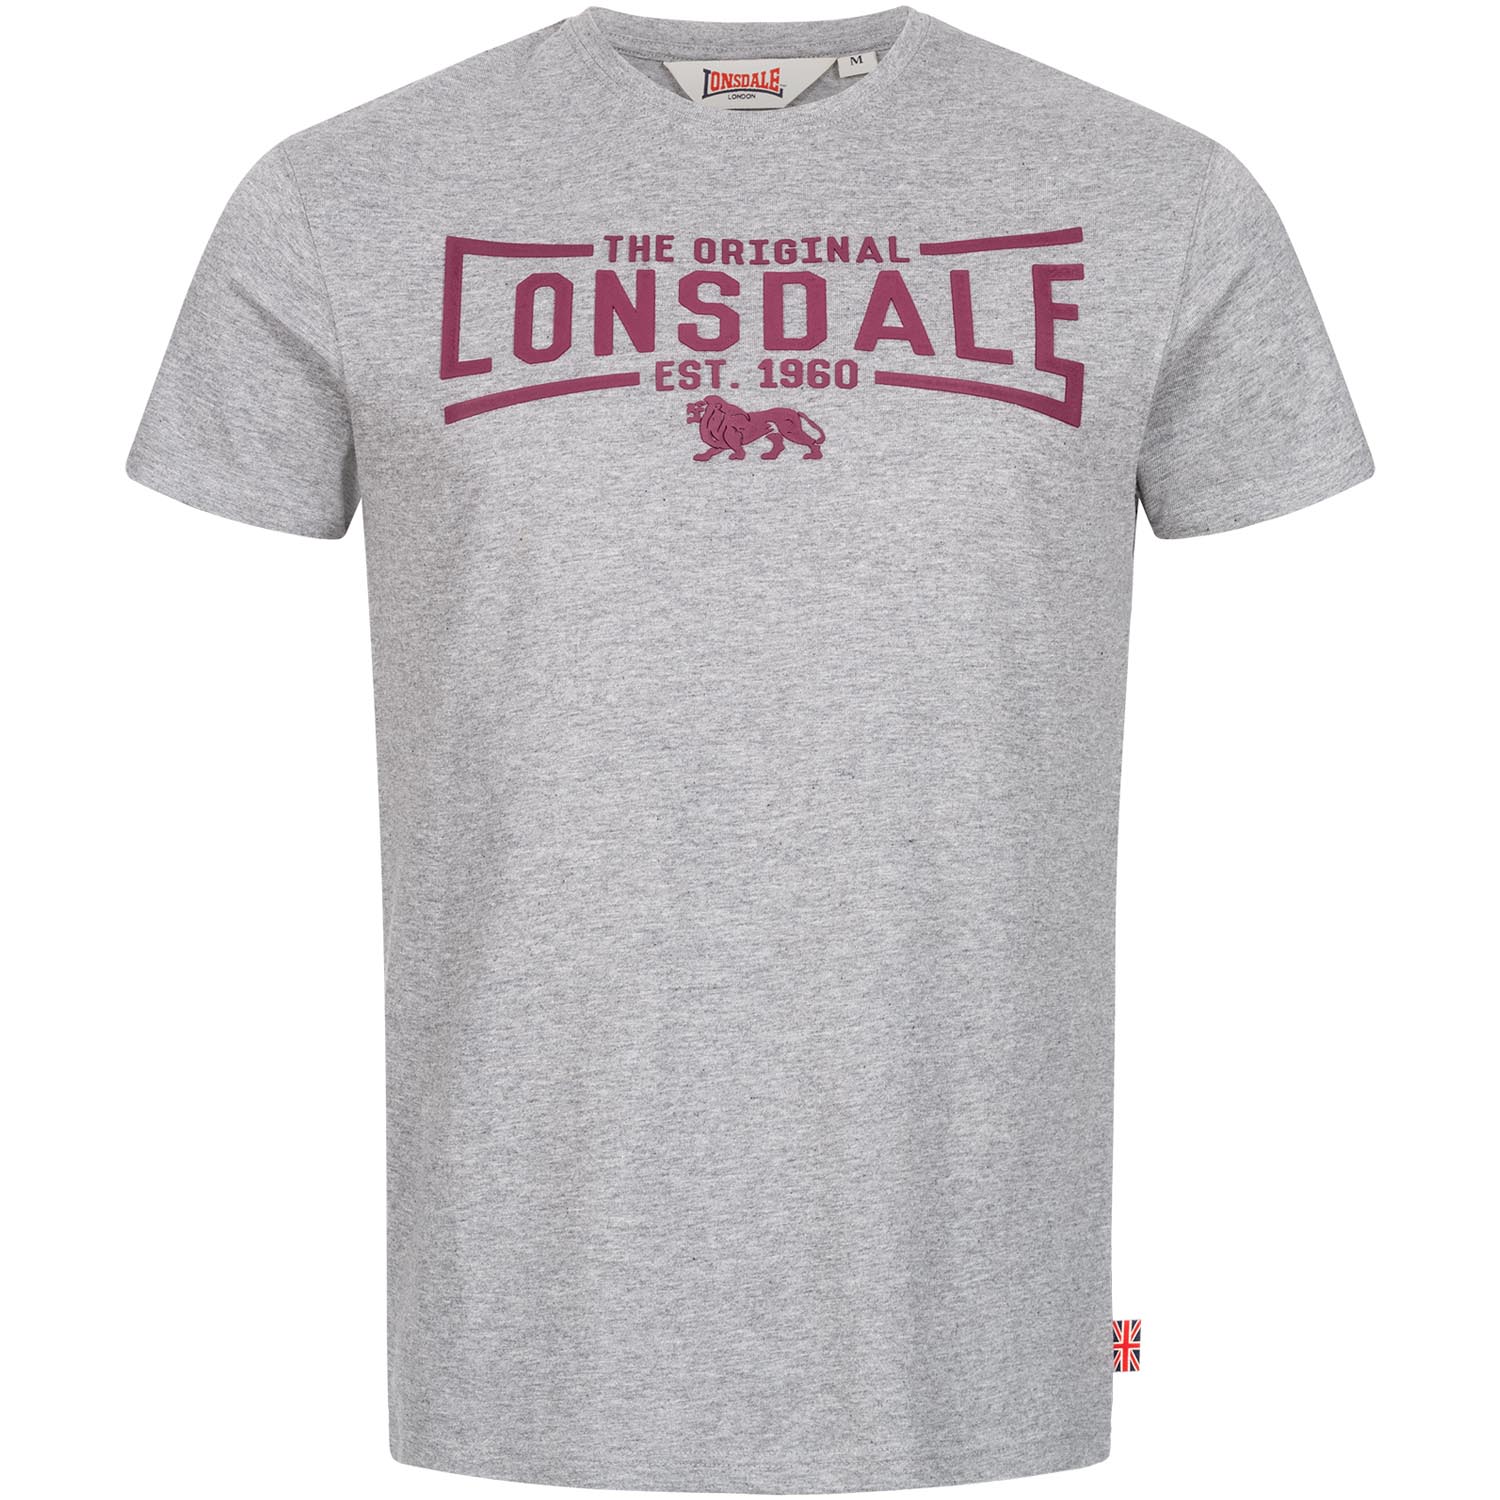 Lonsdale T-Shirt, Nybster, grey-red, L